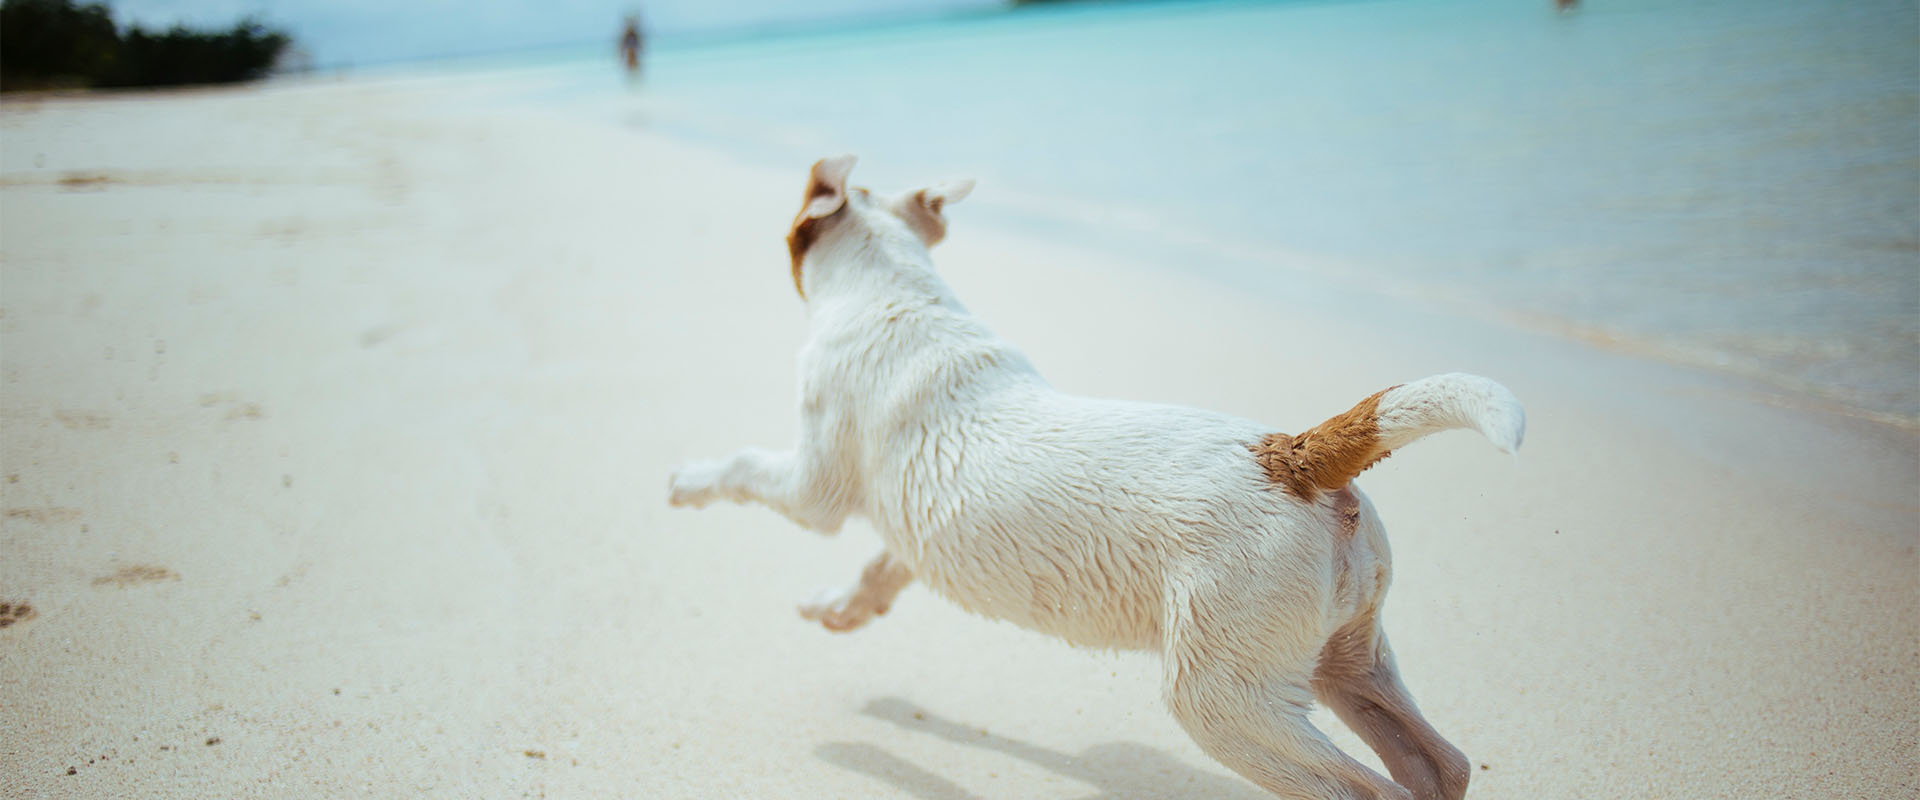 Flying to Maui with your pets?